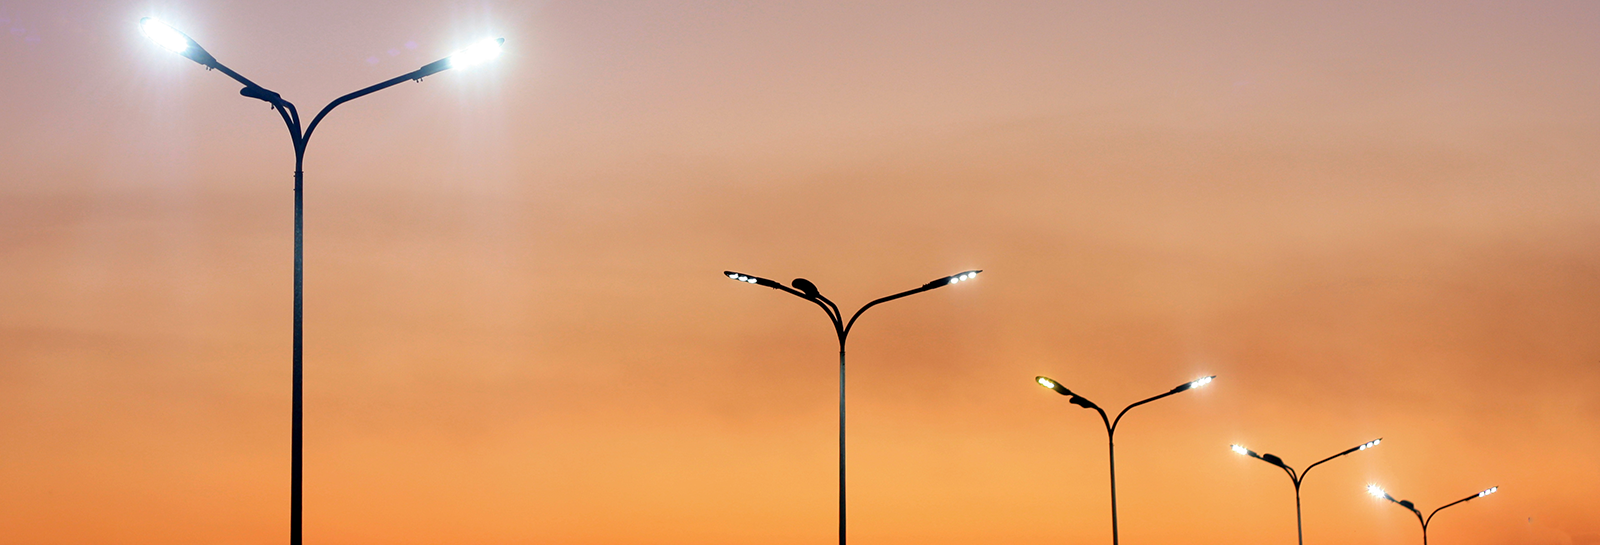 Row of street lights against night sky banner image